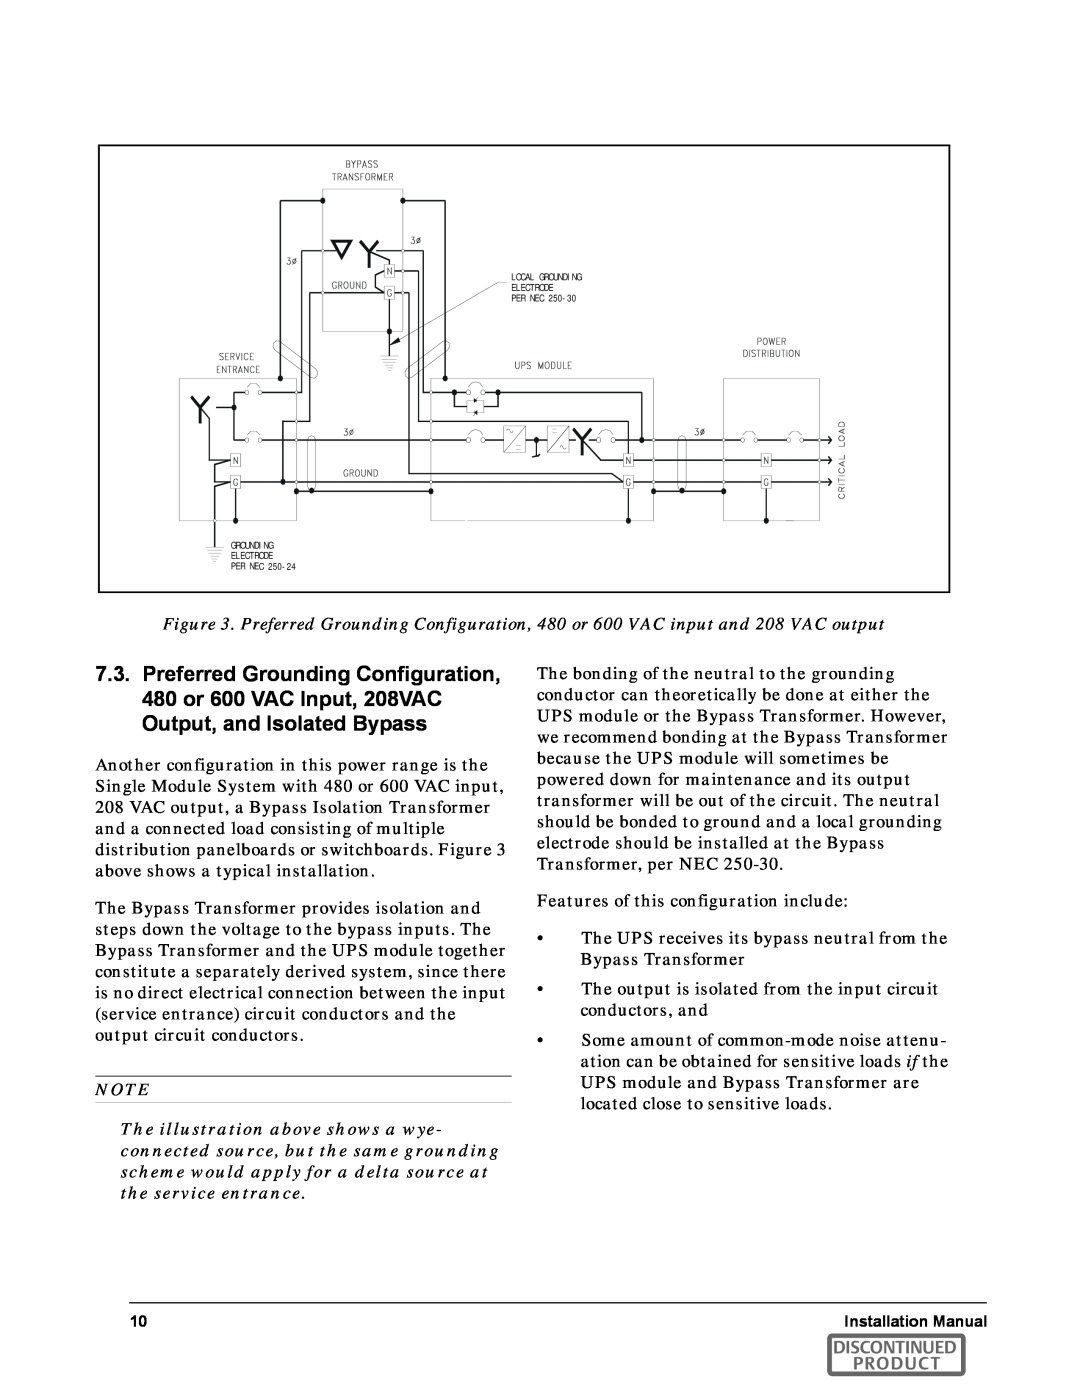 Emerson SERIES 600T manual Features of this configuration include, Discontinued Product 